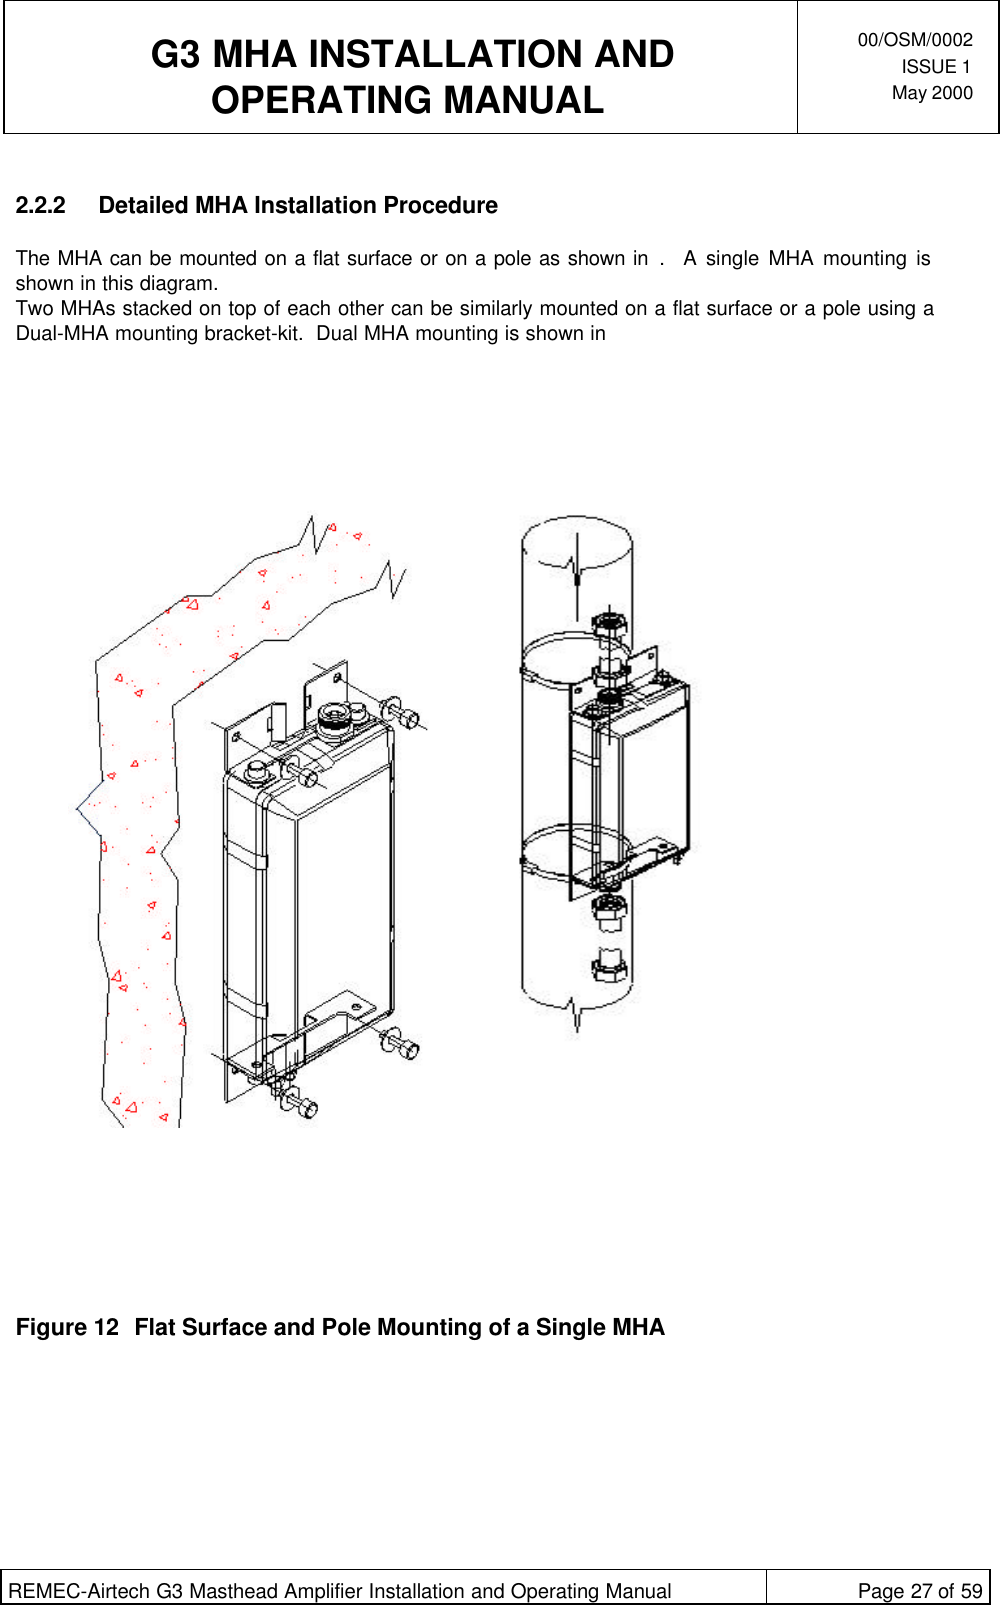  G3 MHA INSTALLATION ANDOPERATING MANUAL00/OSM/0002ISSUE 1May 2000REMEC-Airtech G3 Masthead Amplifier Installation and Operating Manual Page 27 of 592.2.2 Detailed MHA Installation ProcedureThe MHA can be mounted on a flat surface or on a pole as shown in .  A single MHA mounting isshown in this diagram.Two MHAs stacked on top of each other can be similarly mounted on a flat surface or a pole using aDual-MHA mounting bracket-kit.  Dual MHA mounting is shown inFigure 12 Flat Surface and Pole Mounting of a Single MHA